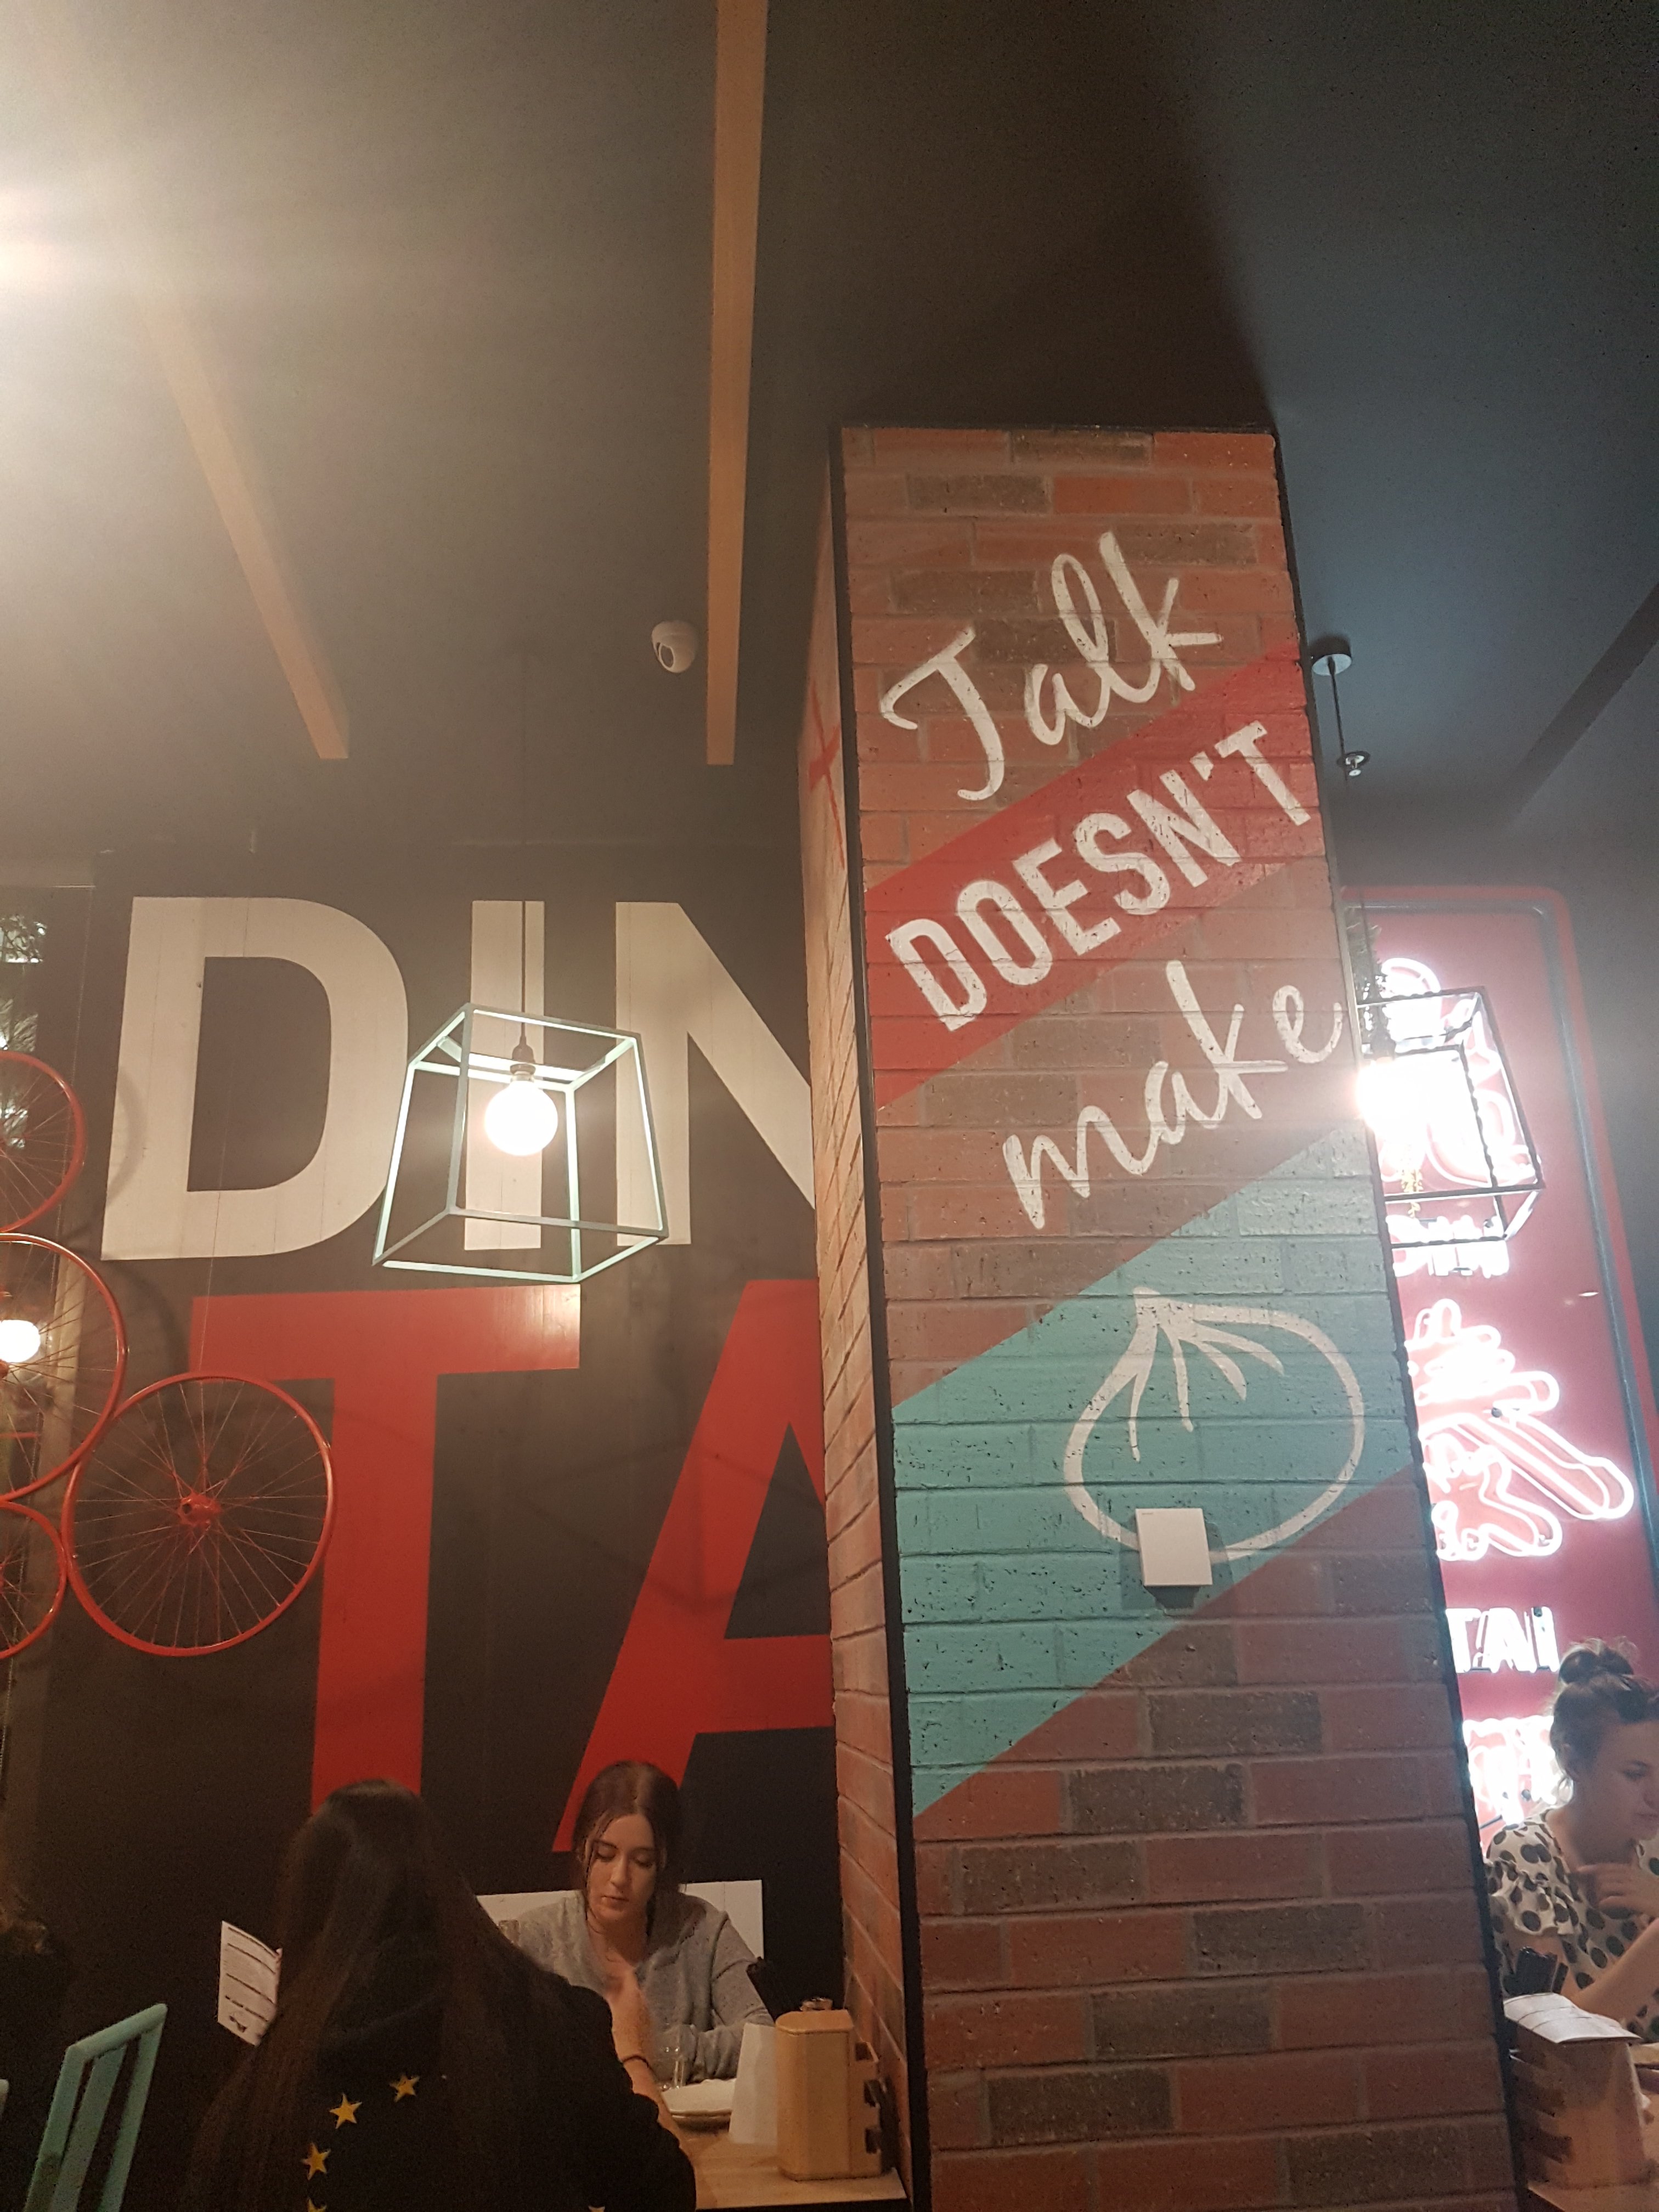 Indoor column of Din Tai Fung restaurant with the words 'Talk doesn't make' and a drawing of a large dumpling. White women are sitting on either side of the sign, looking down at their tables